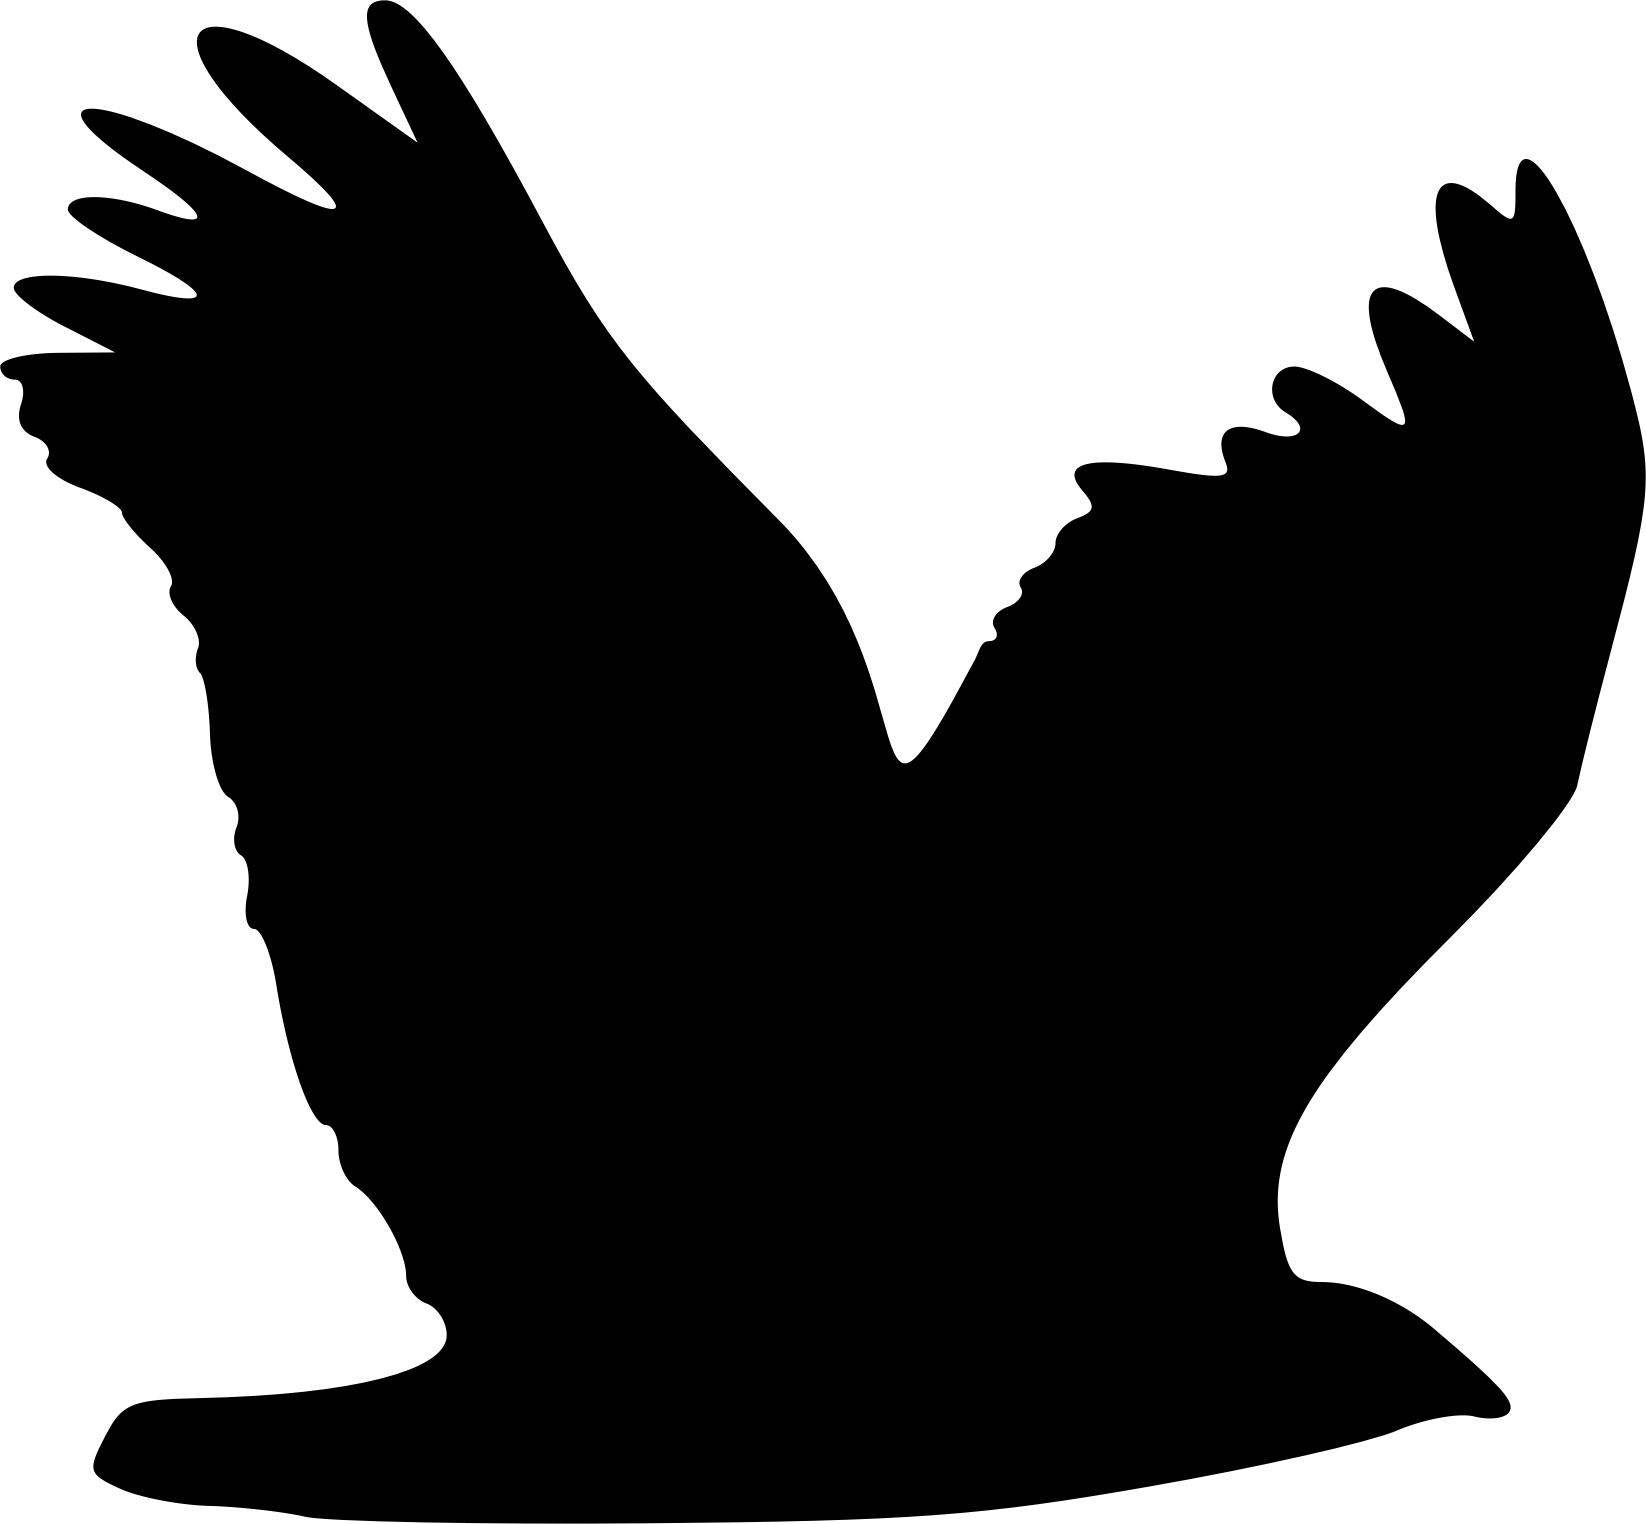 Eagle silhouette 1 png